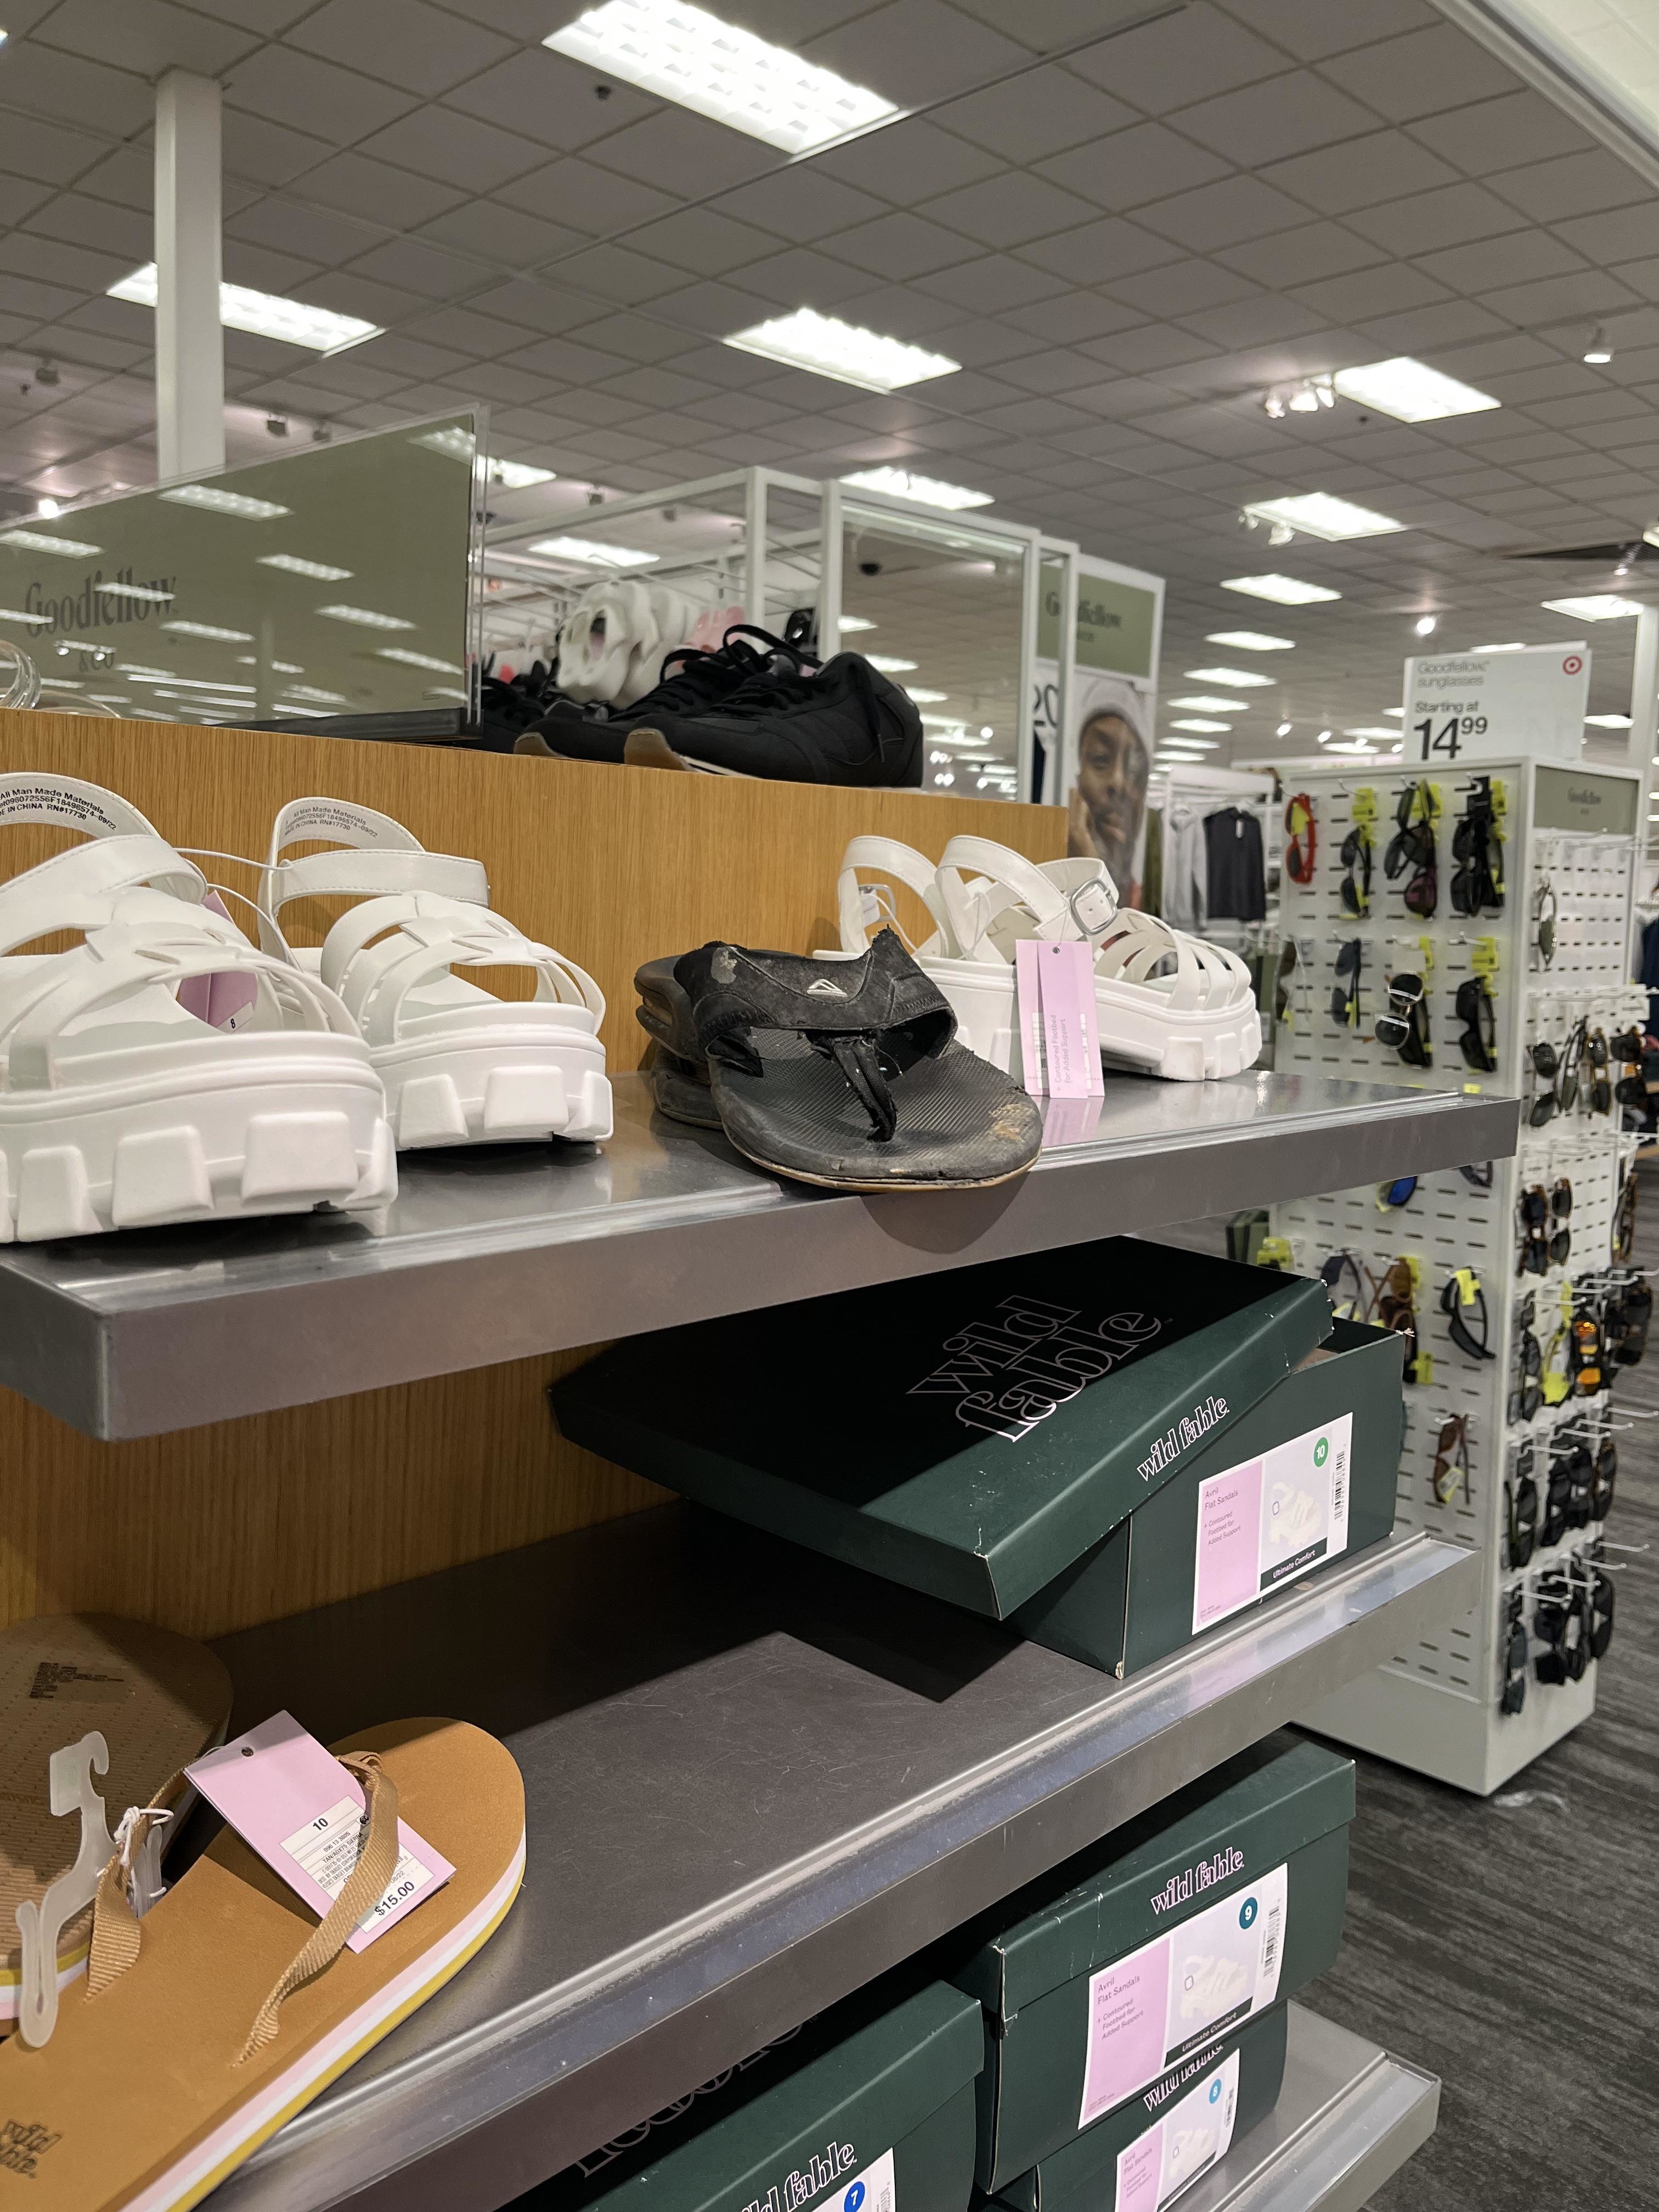 Shelves stocked with various shoes and shoeboxes in a retail store setting and one person&#x27;s used dirty flop-flop sitting on the shelf